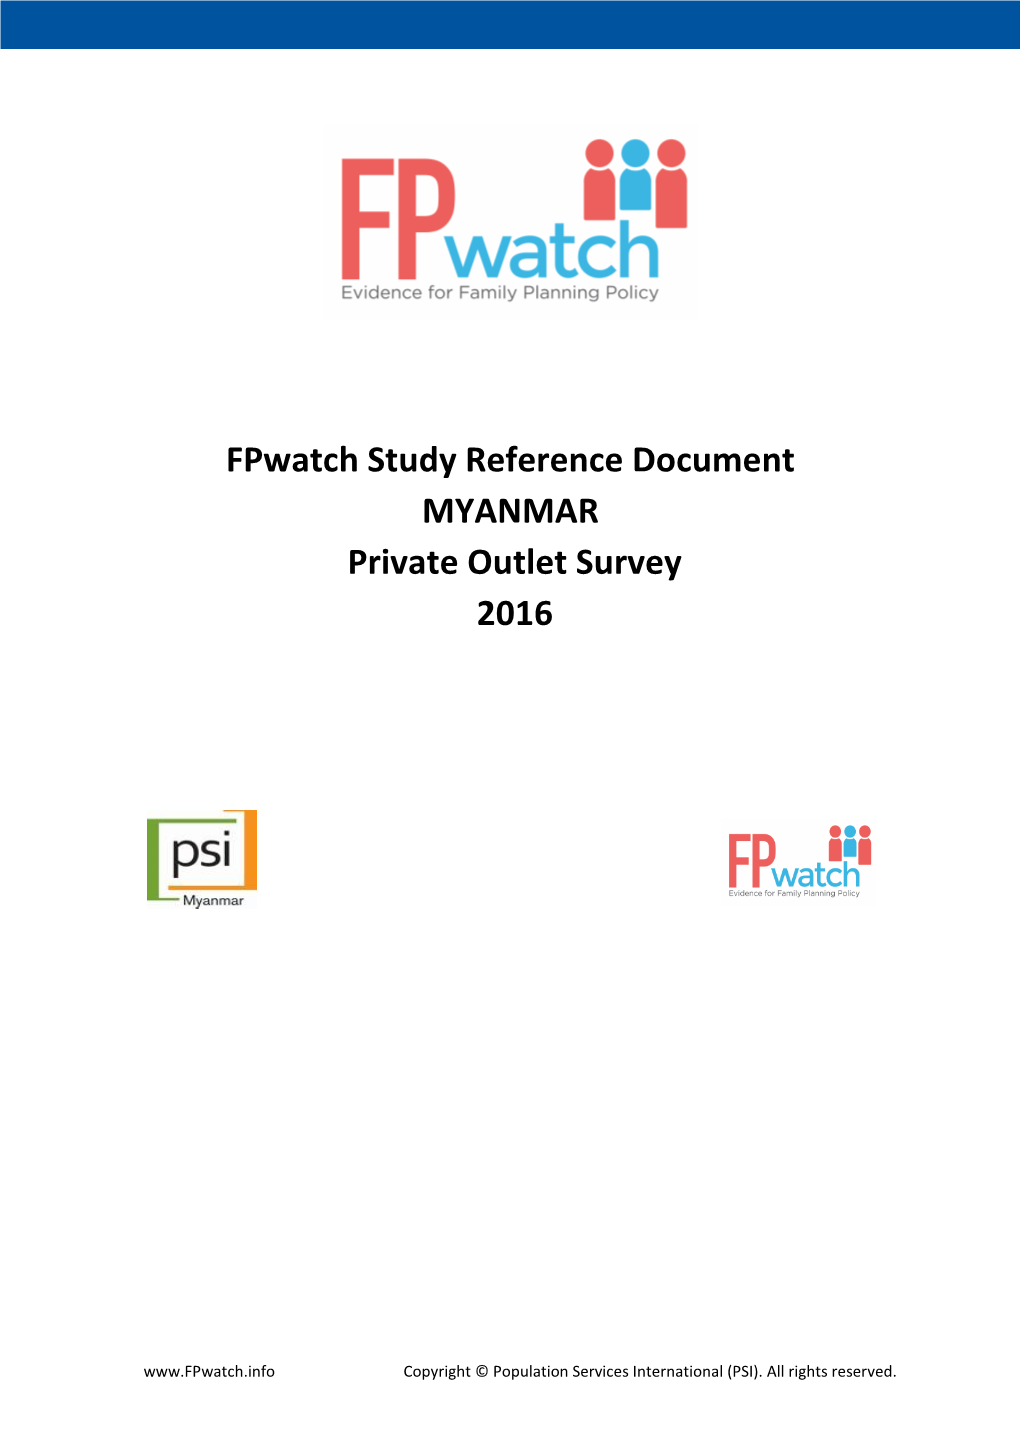 Fpwatch Study Reference Document MYANMAR Private Outlet Survey 2016